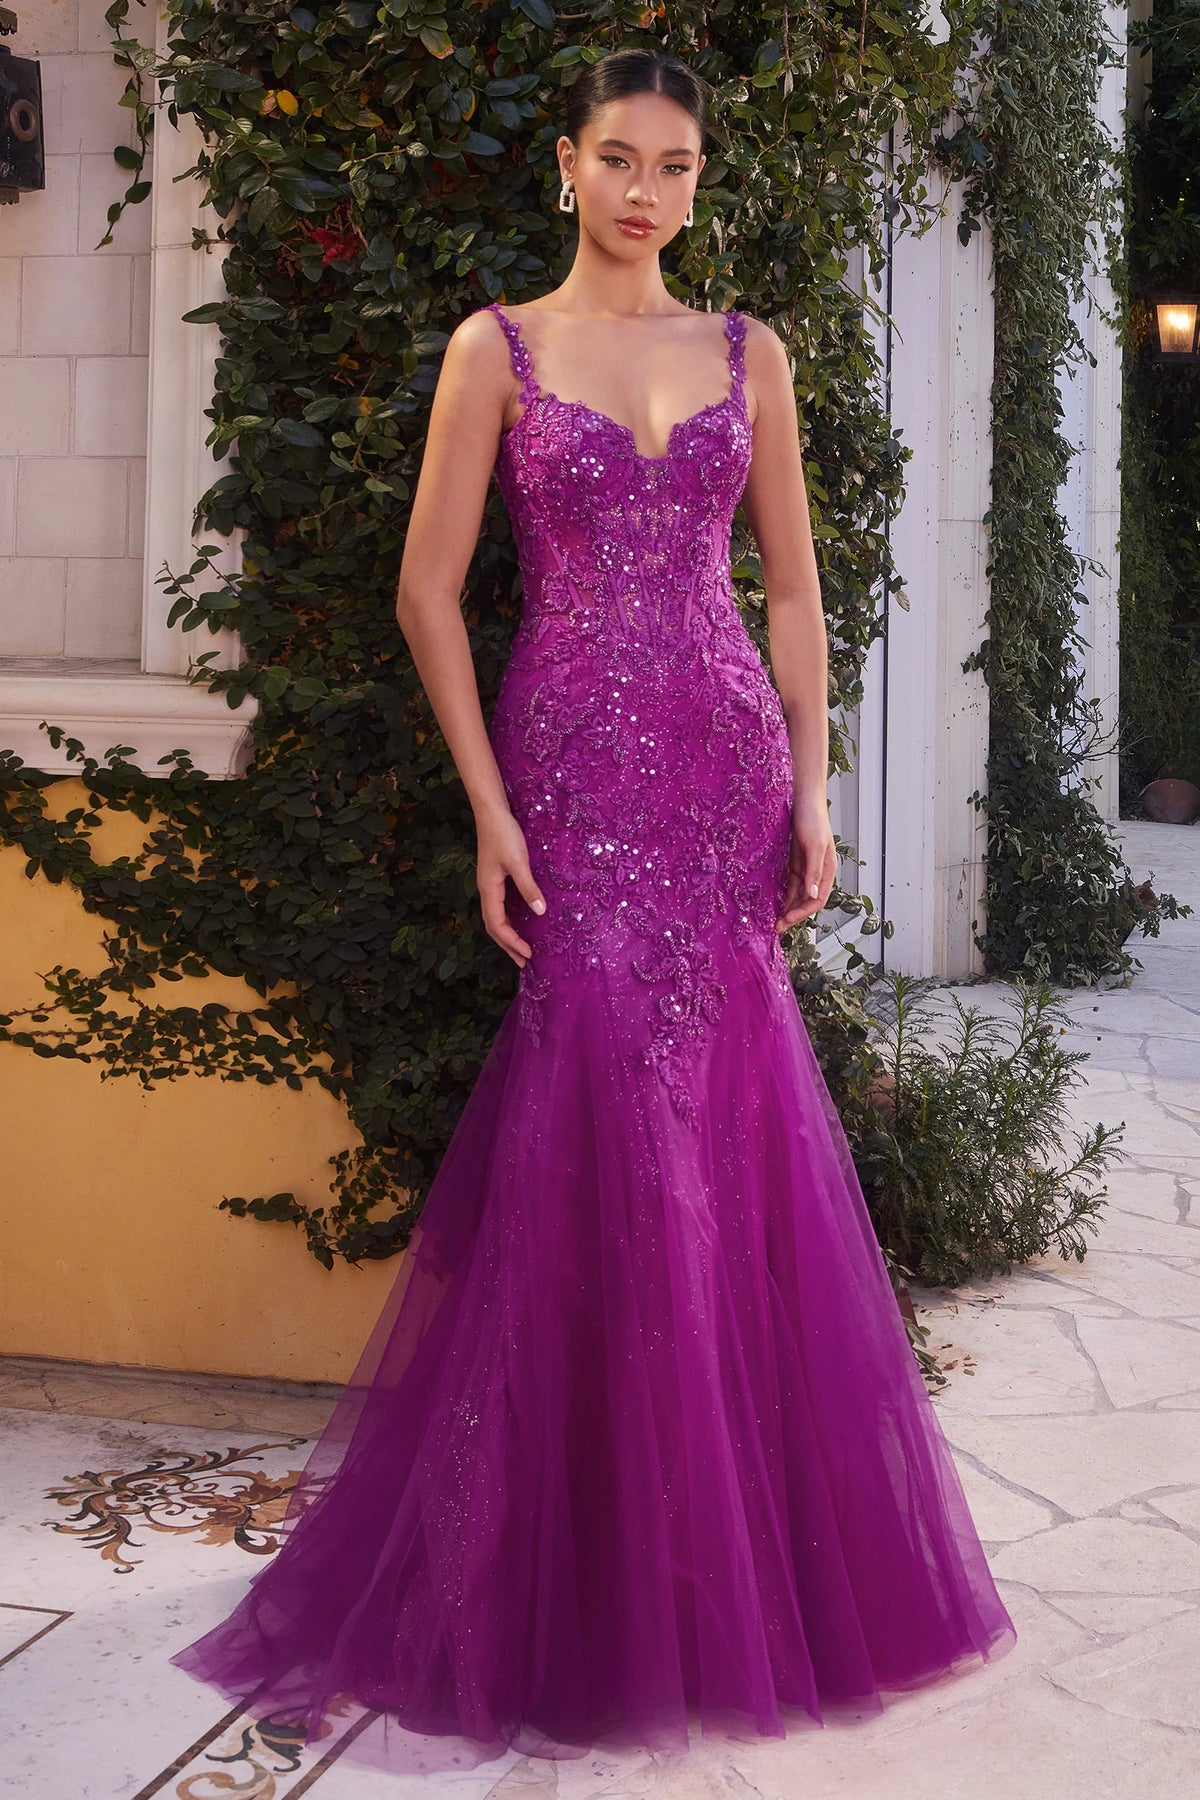 Andrea & Leo A1231 Lace Mermaid Evening Gown - A captivating fitted mermaid gown adorned with intricate lace appliqué, a sheer boned bodice, and an open scoop back for a timeless and enchanting allure.  The model is wearing the dress in Amethyst.